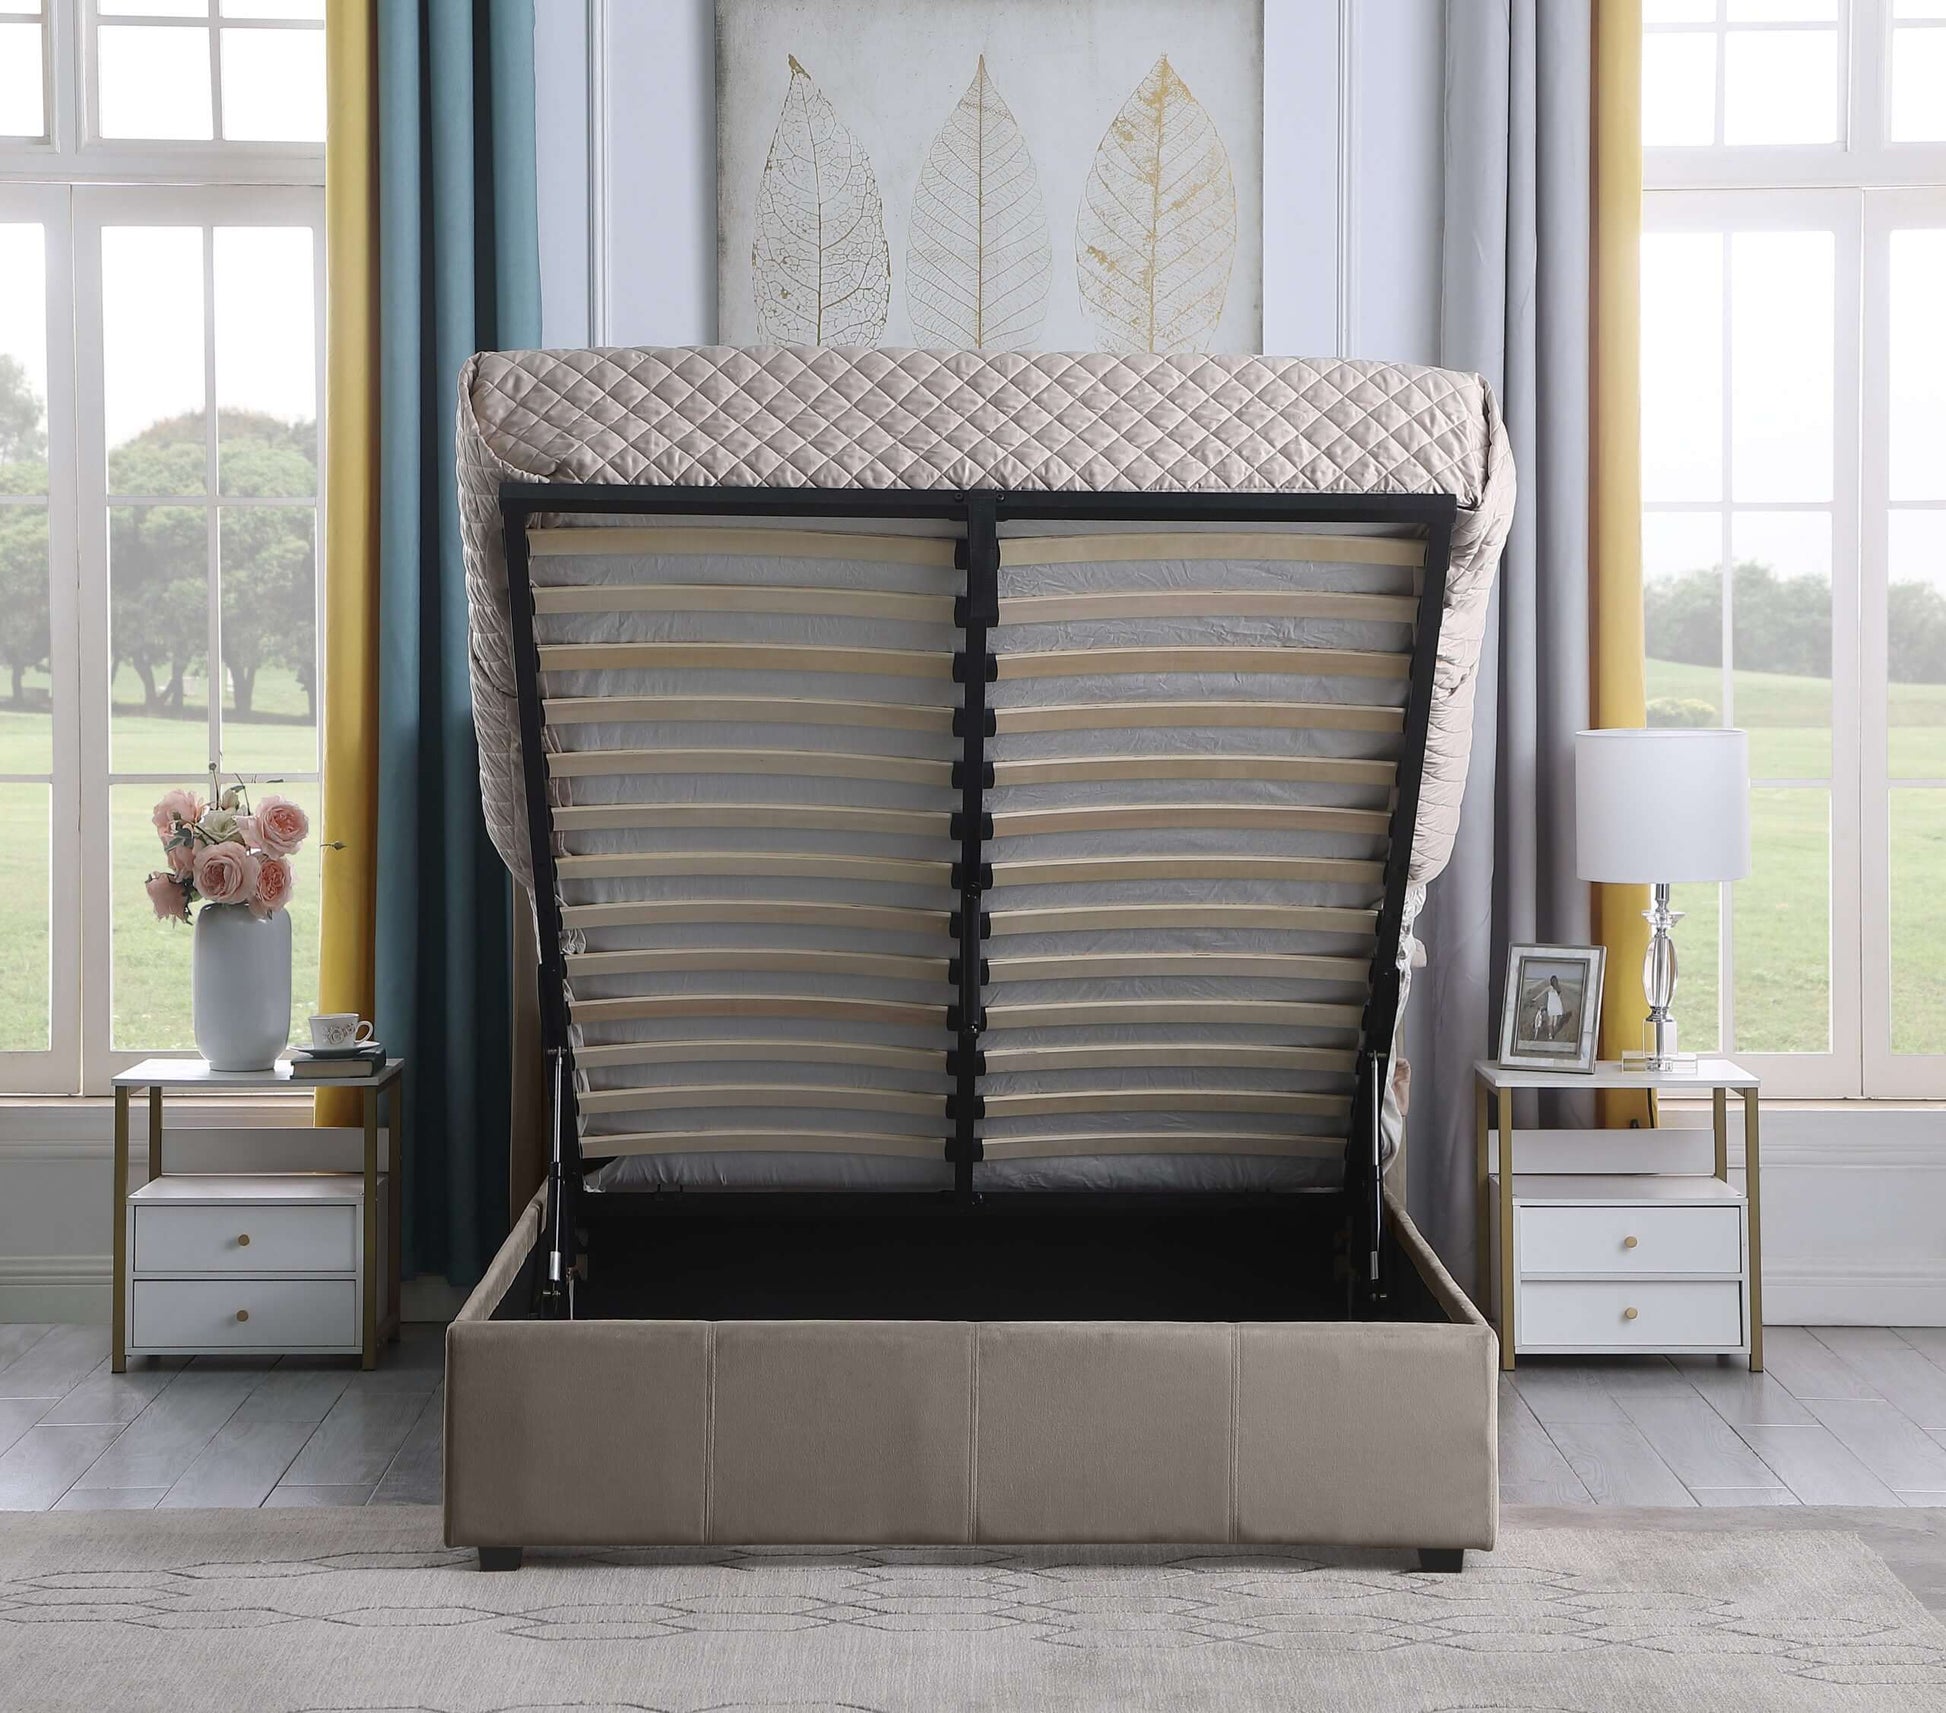 Amelia Plus 5' Storage King Bed - Oyster Velvet Fabric - The Right Buy Store